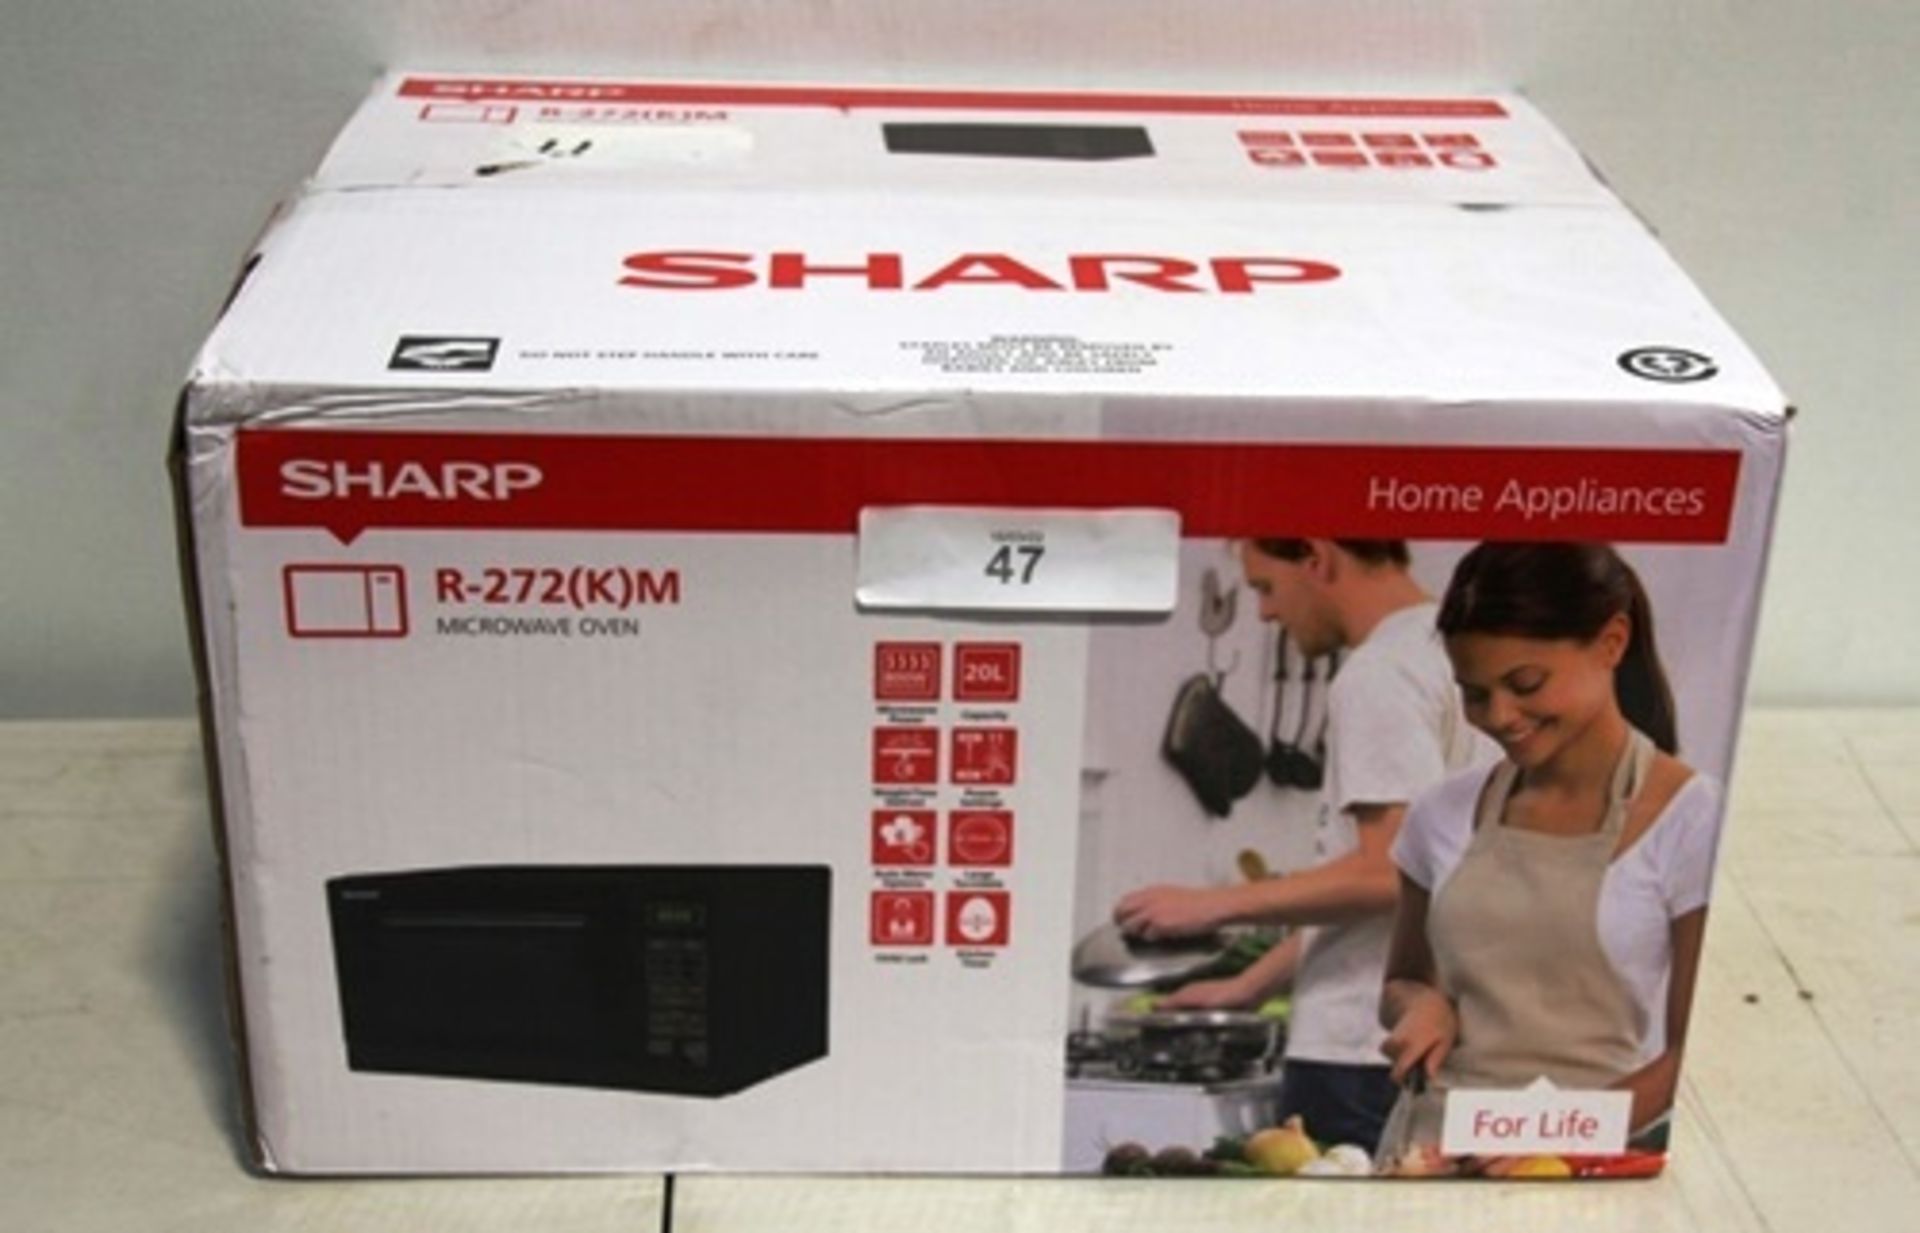 1 x Sharp R-272 KM microwave oven - Sealed new in box (ES1)